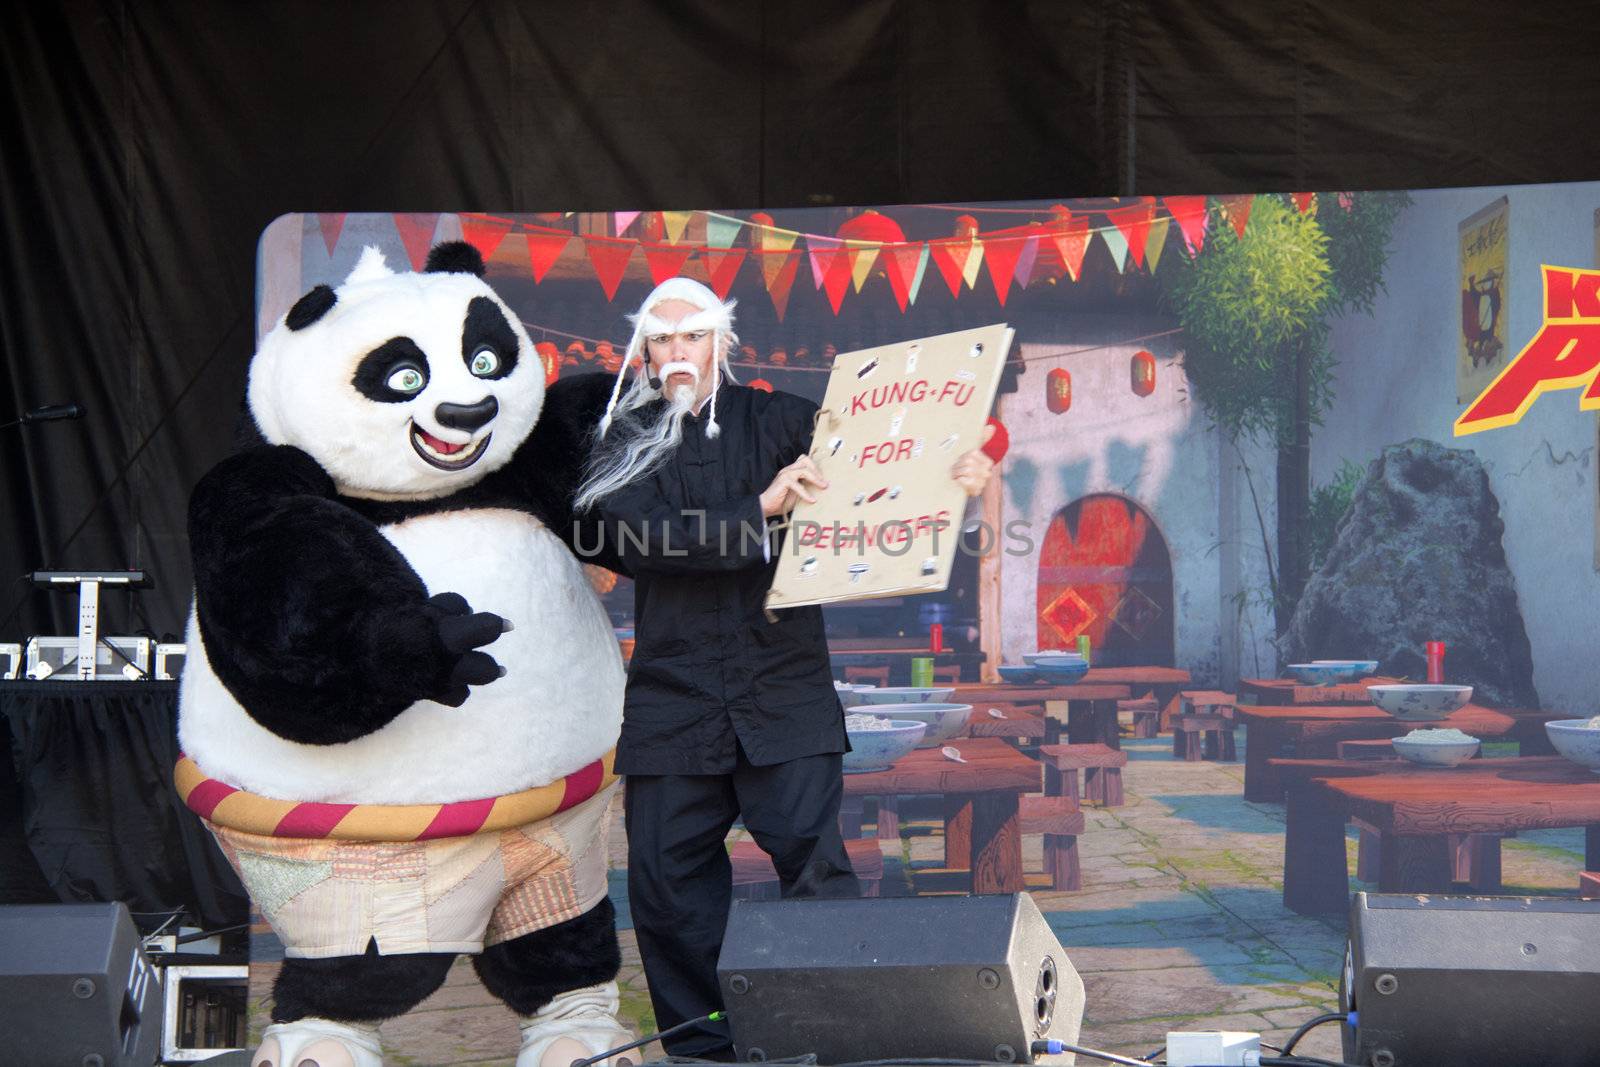 Po and the kung fu master performing at the Kung fu Panda experience show